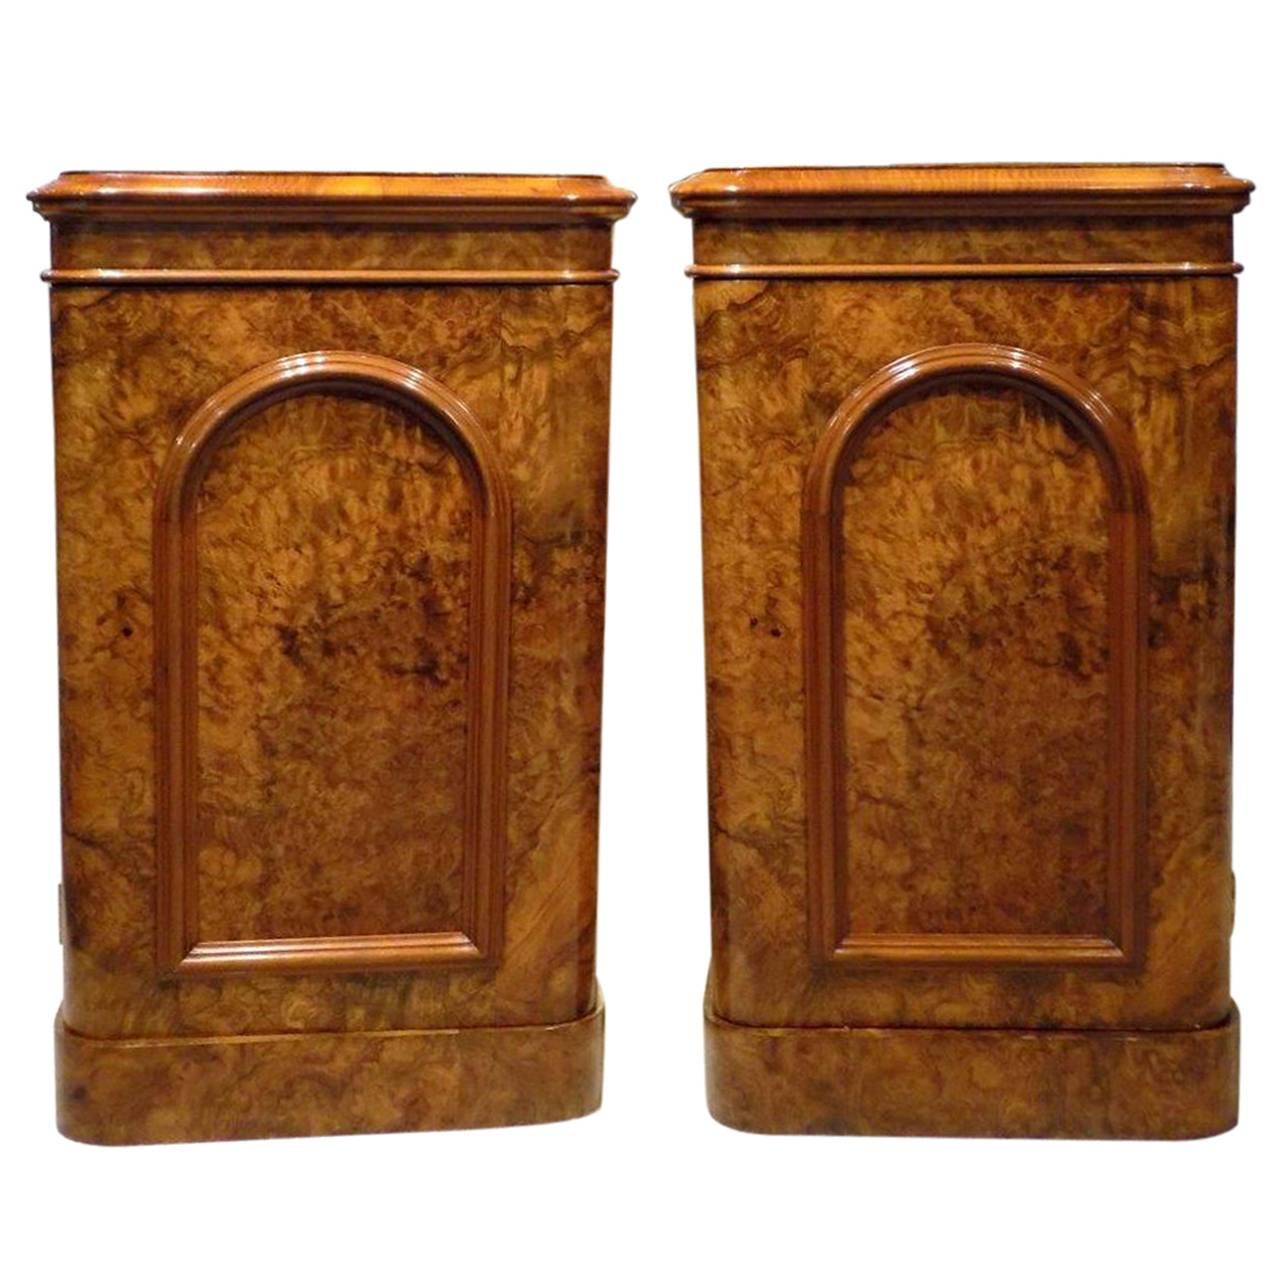 Pair of Burr Walnut Victorian Period Antique Bedside Cabinets